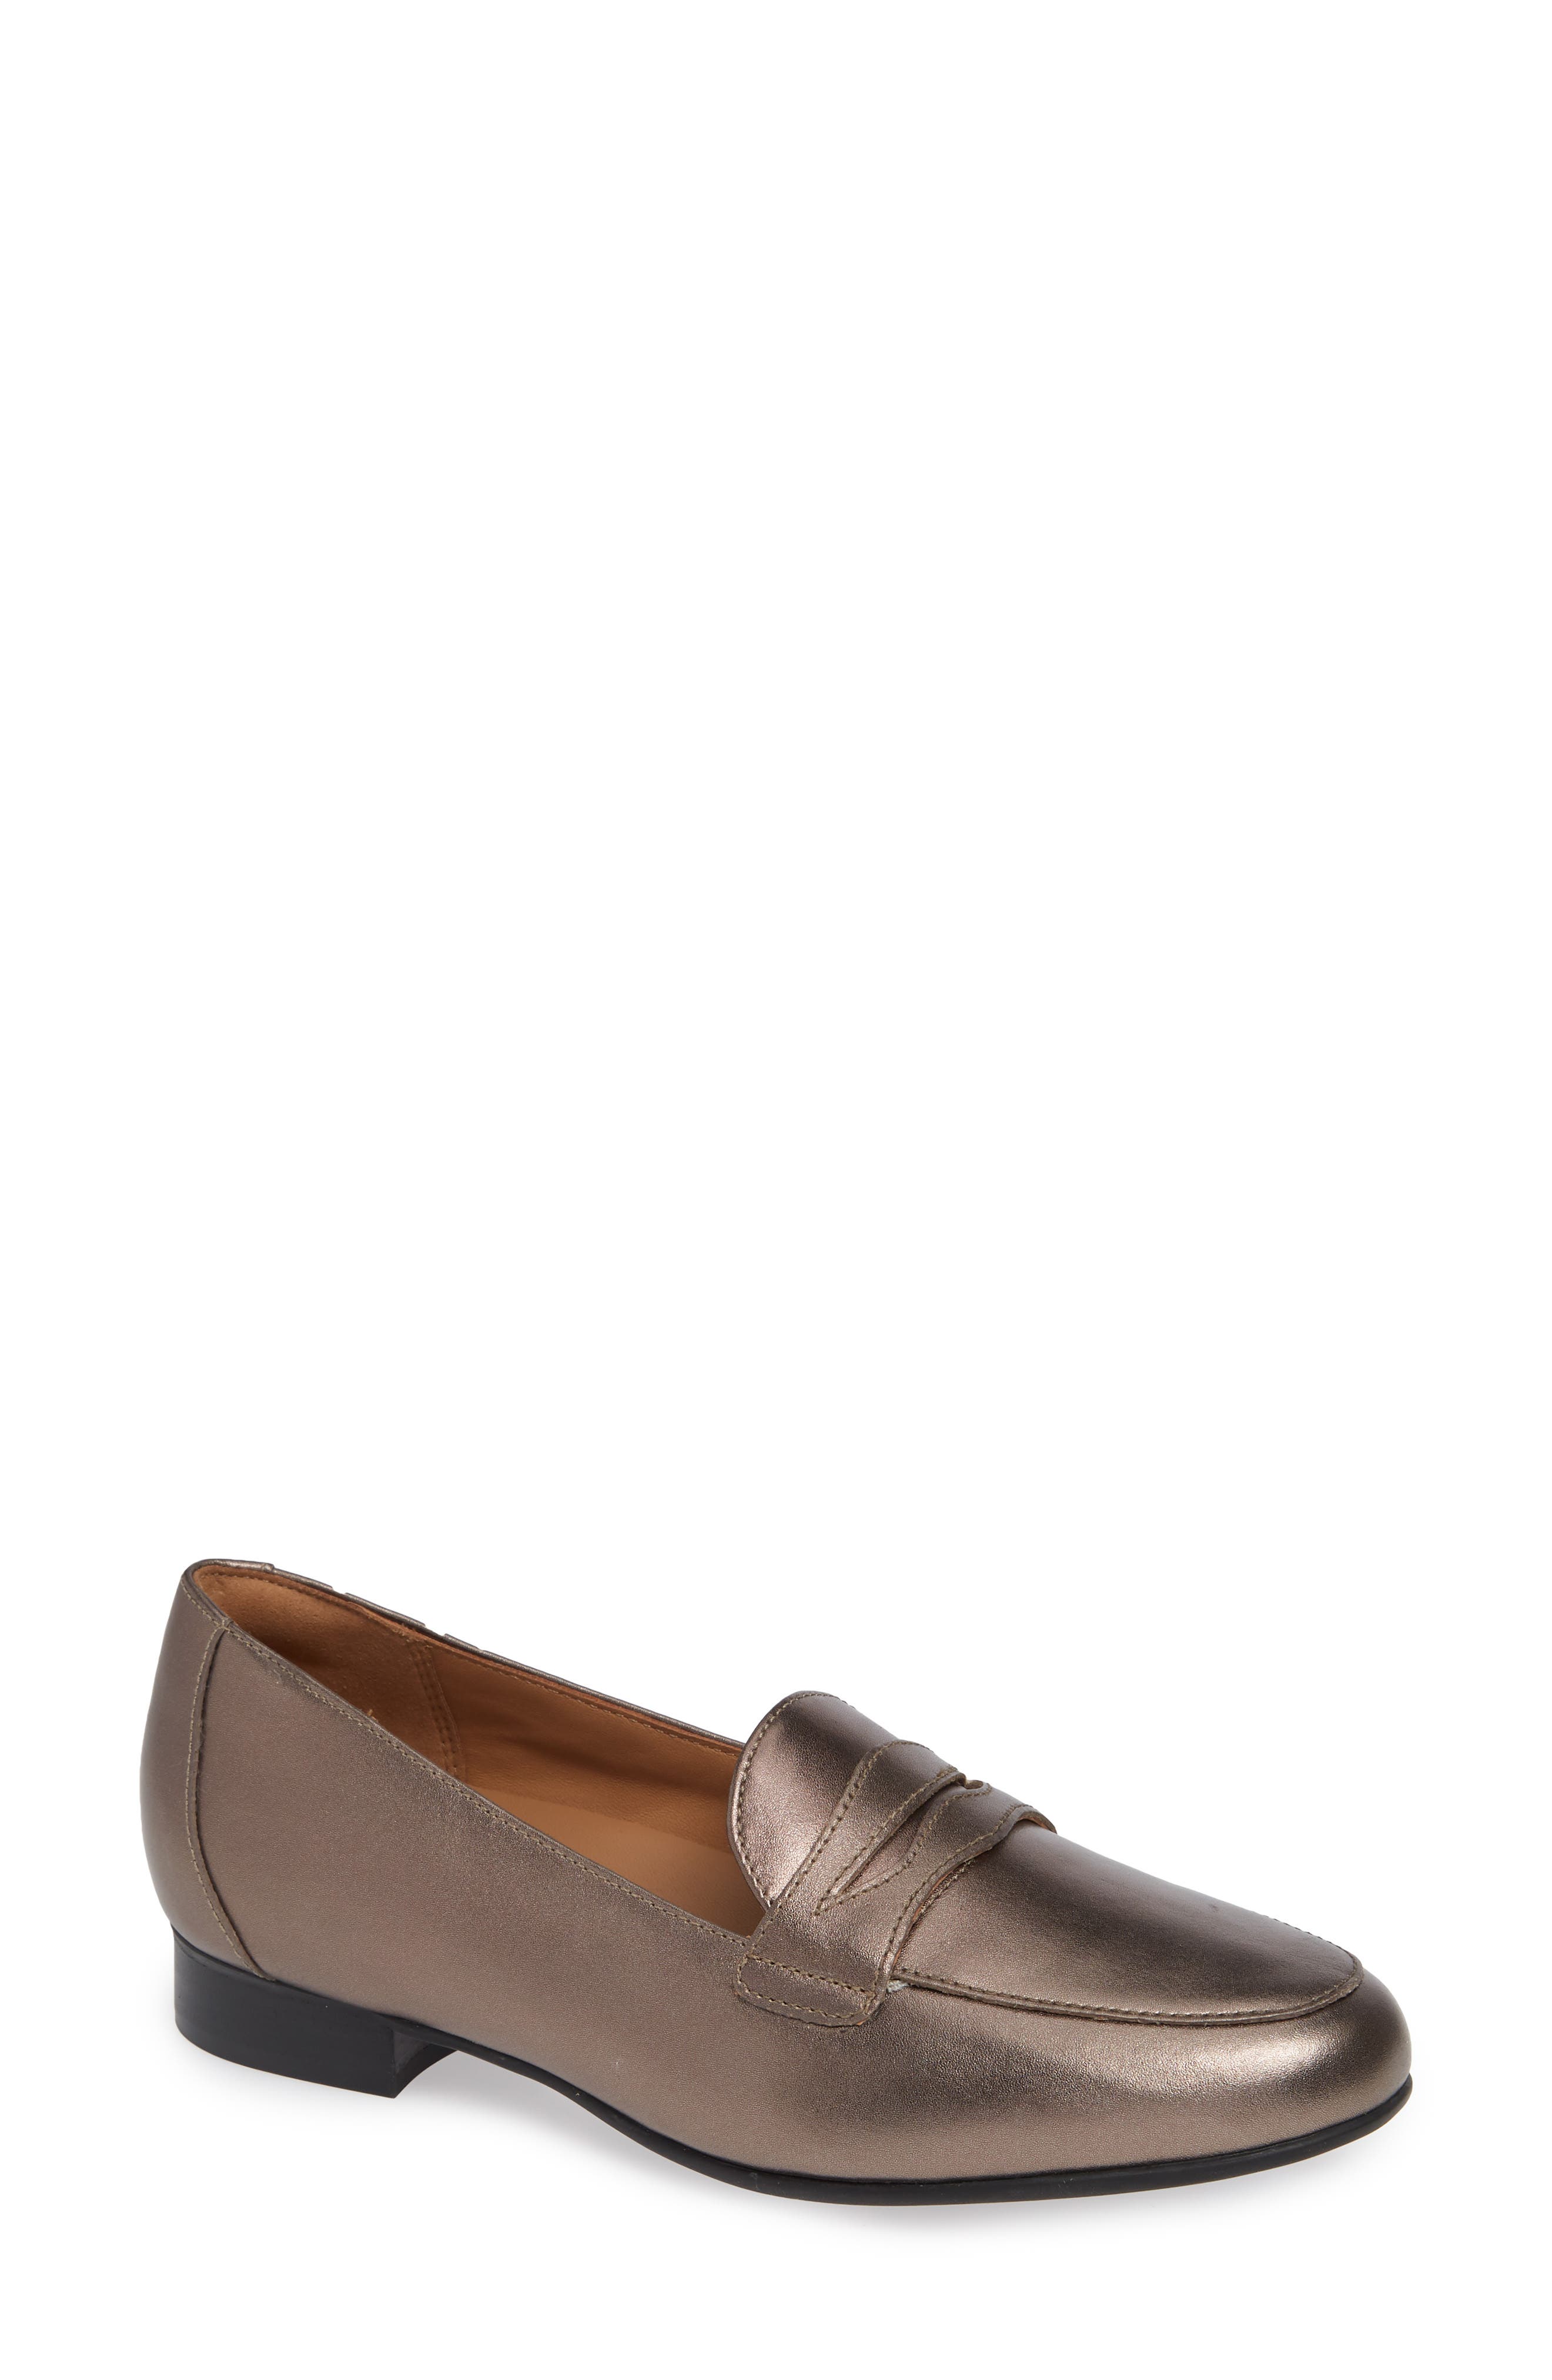 clarks womens shoes nordstrom